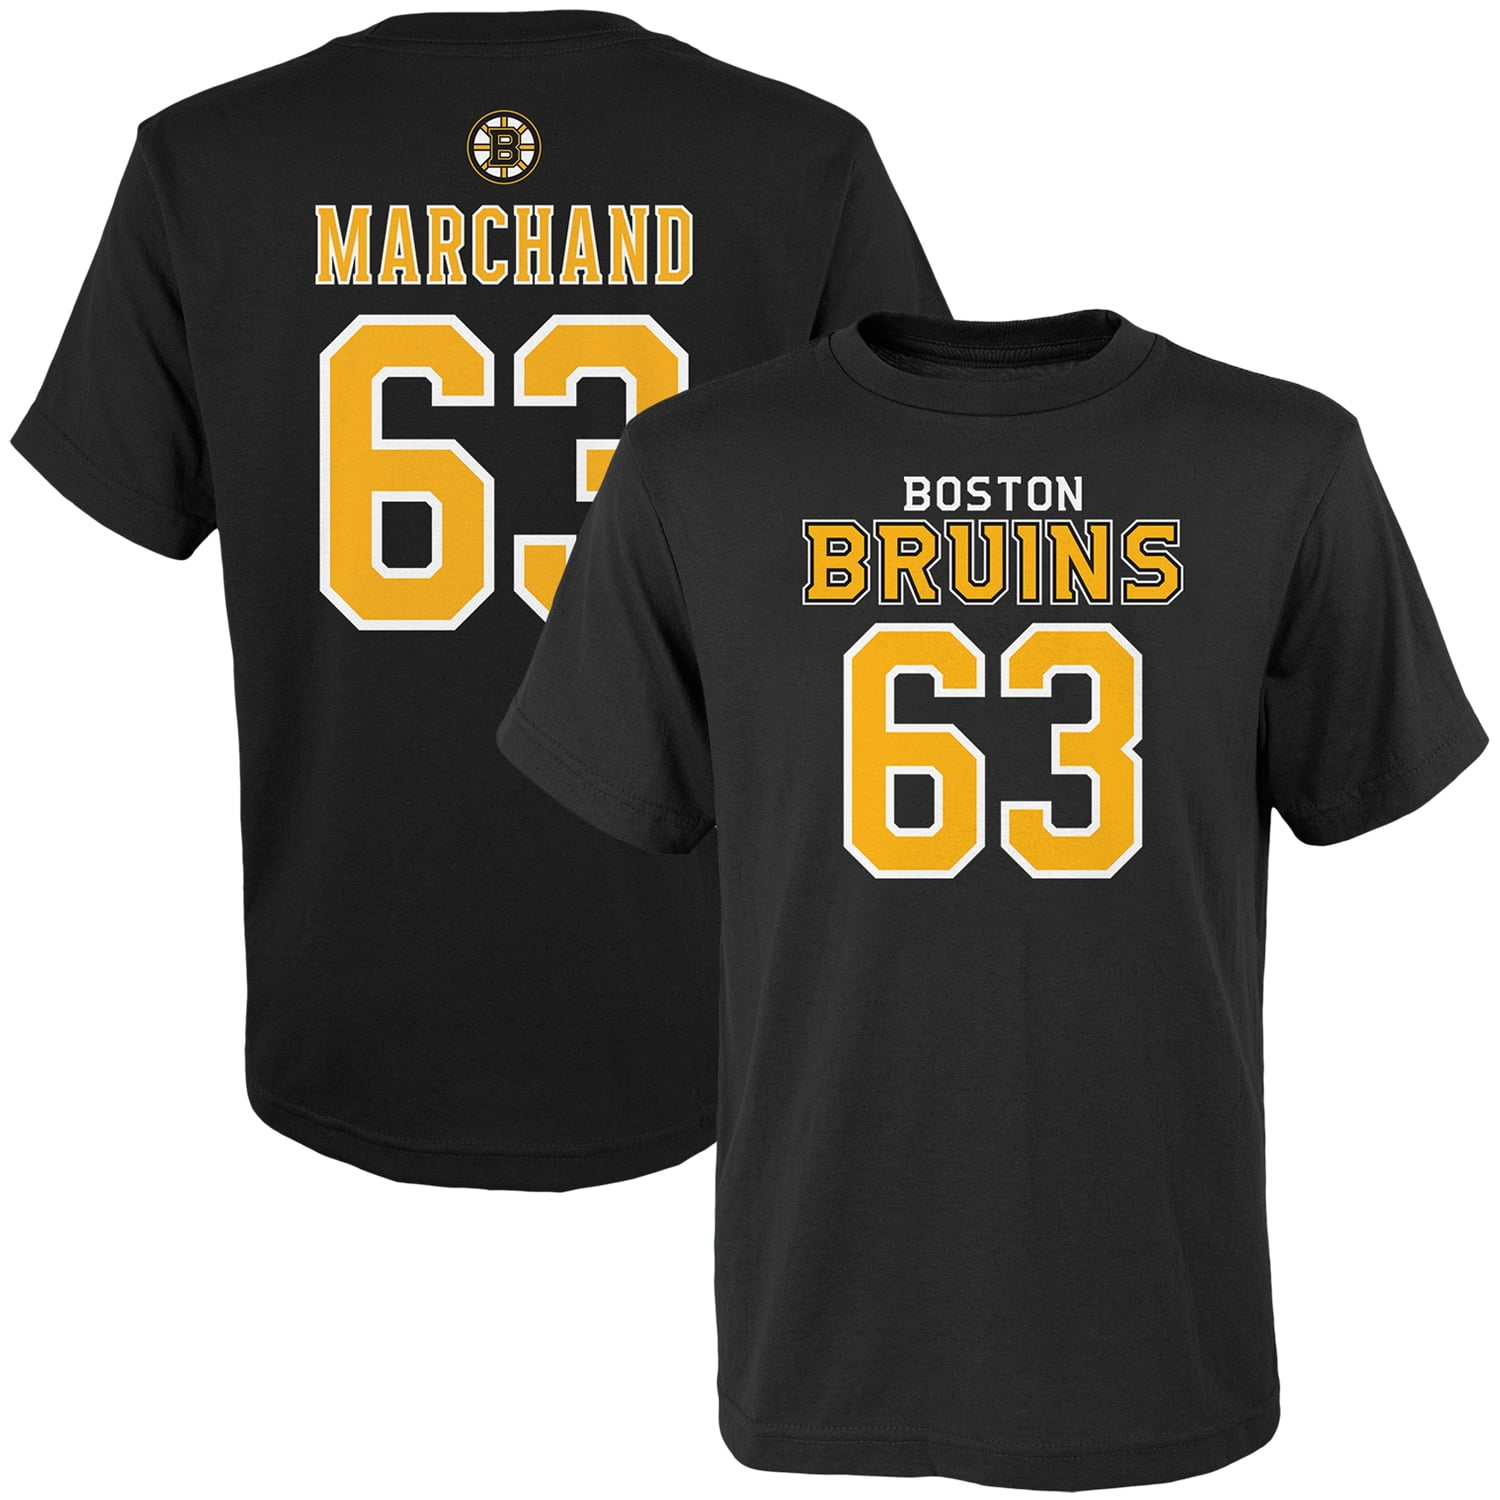 marchand youth jersey